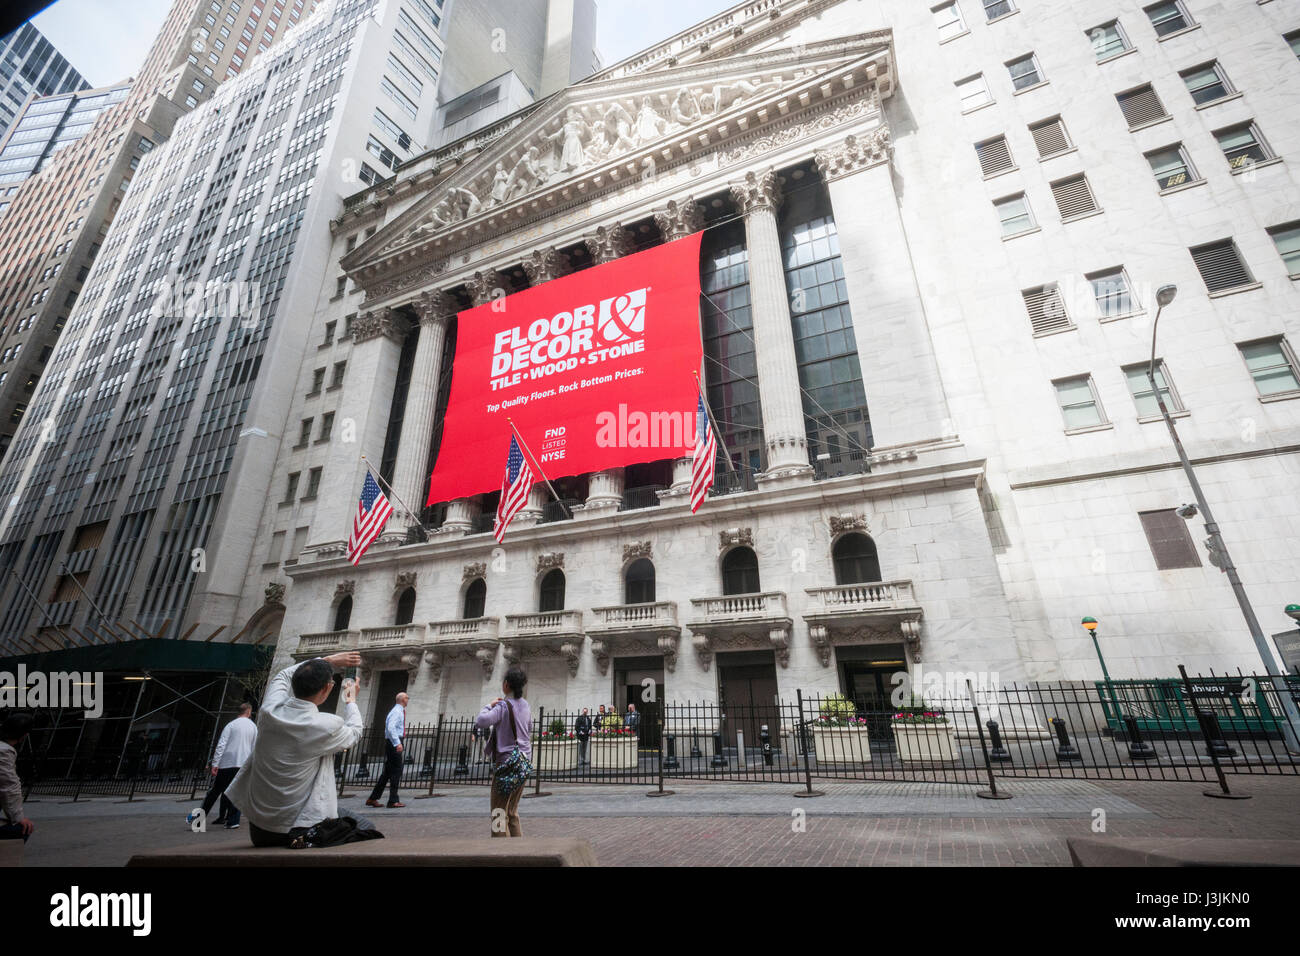 The facade of the New York Stock Exchange is decorated for the first day of  trading for Floor & Decor Holding's initial public offering on Thursday, April  27, 2017. Floor & Decor